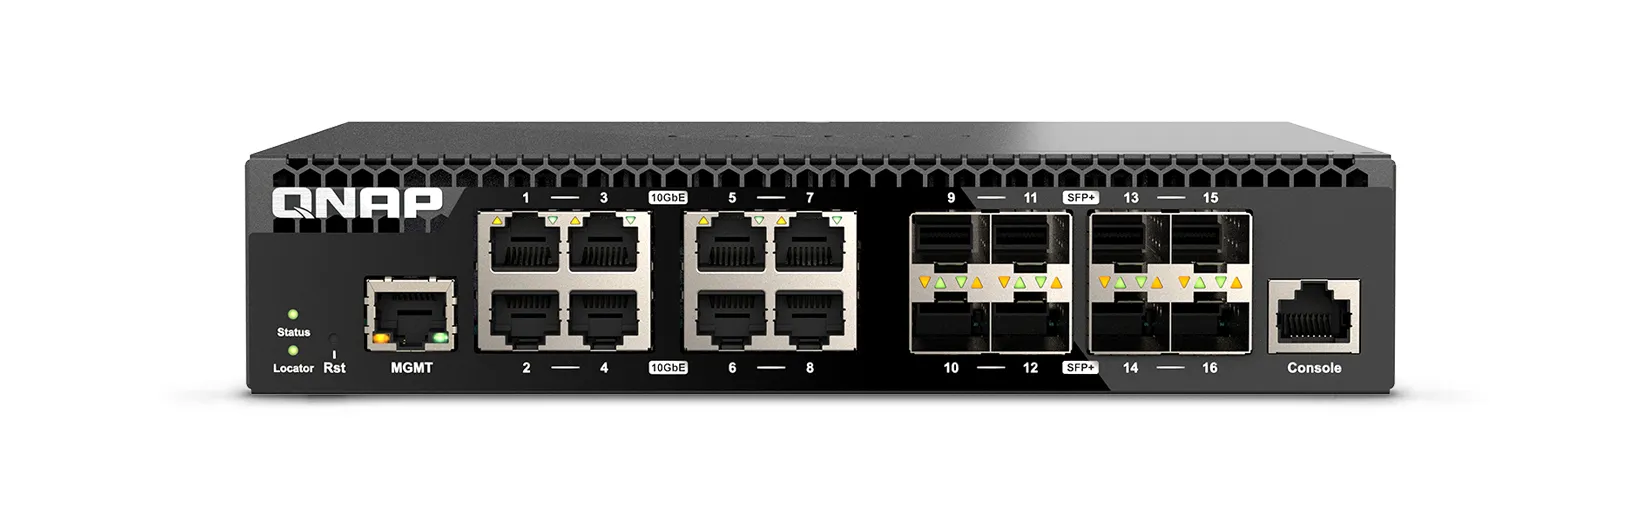 Vente Switchs et Hubs QNAP QSW-M3216R-8S8T Managed Switch 16 port of 10GbE sur hello RSE